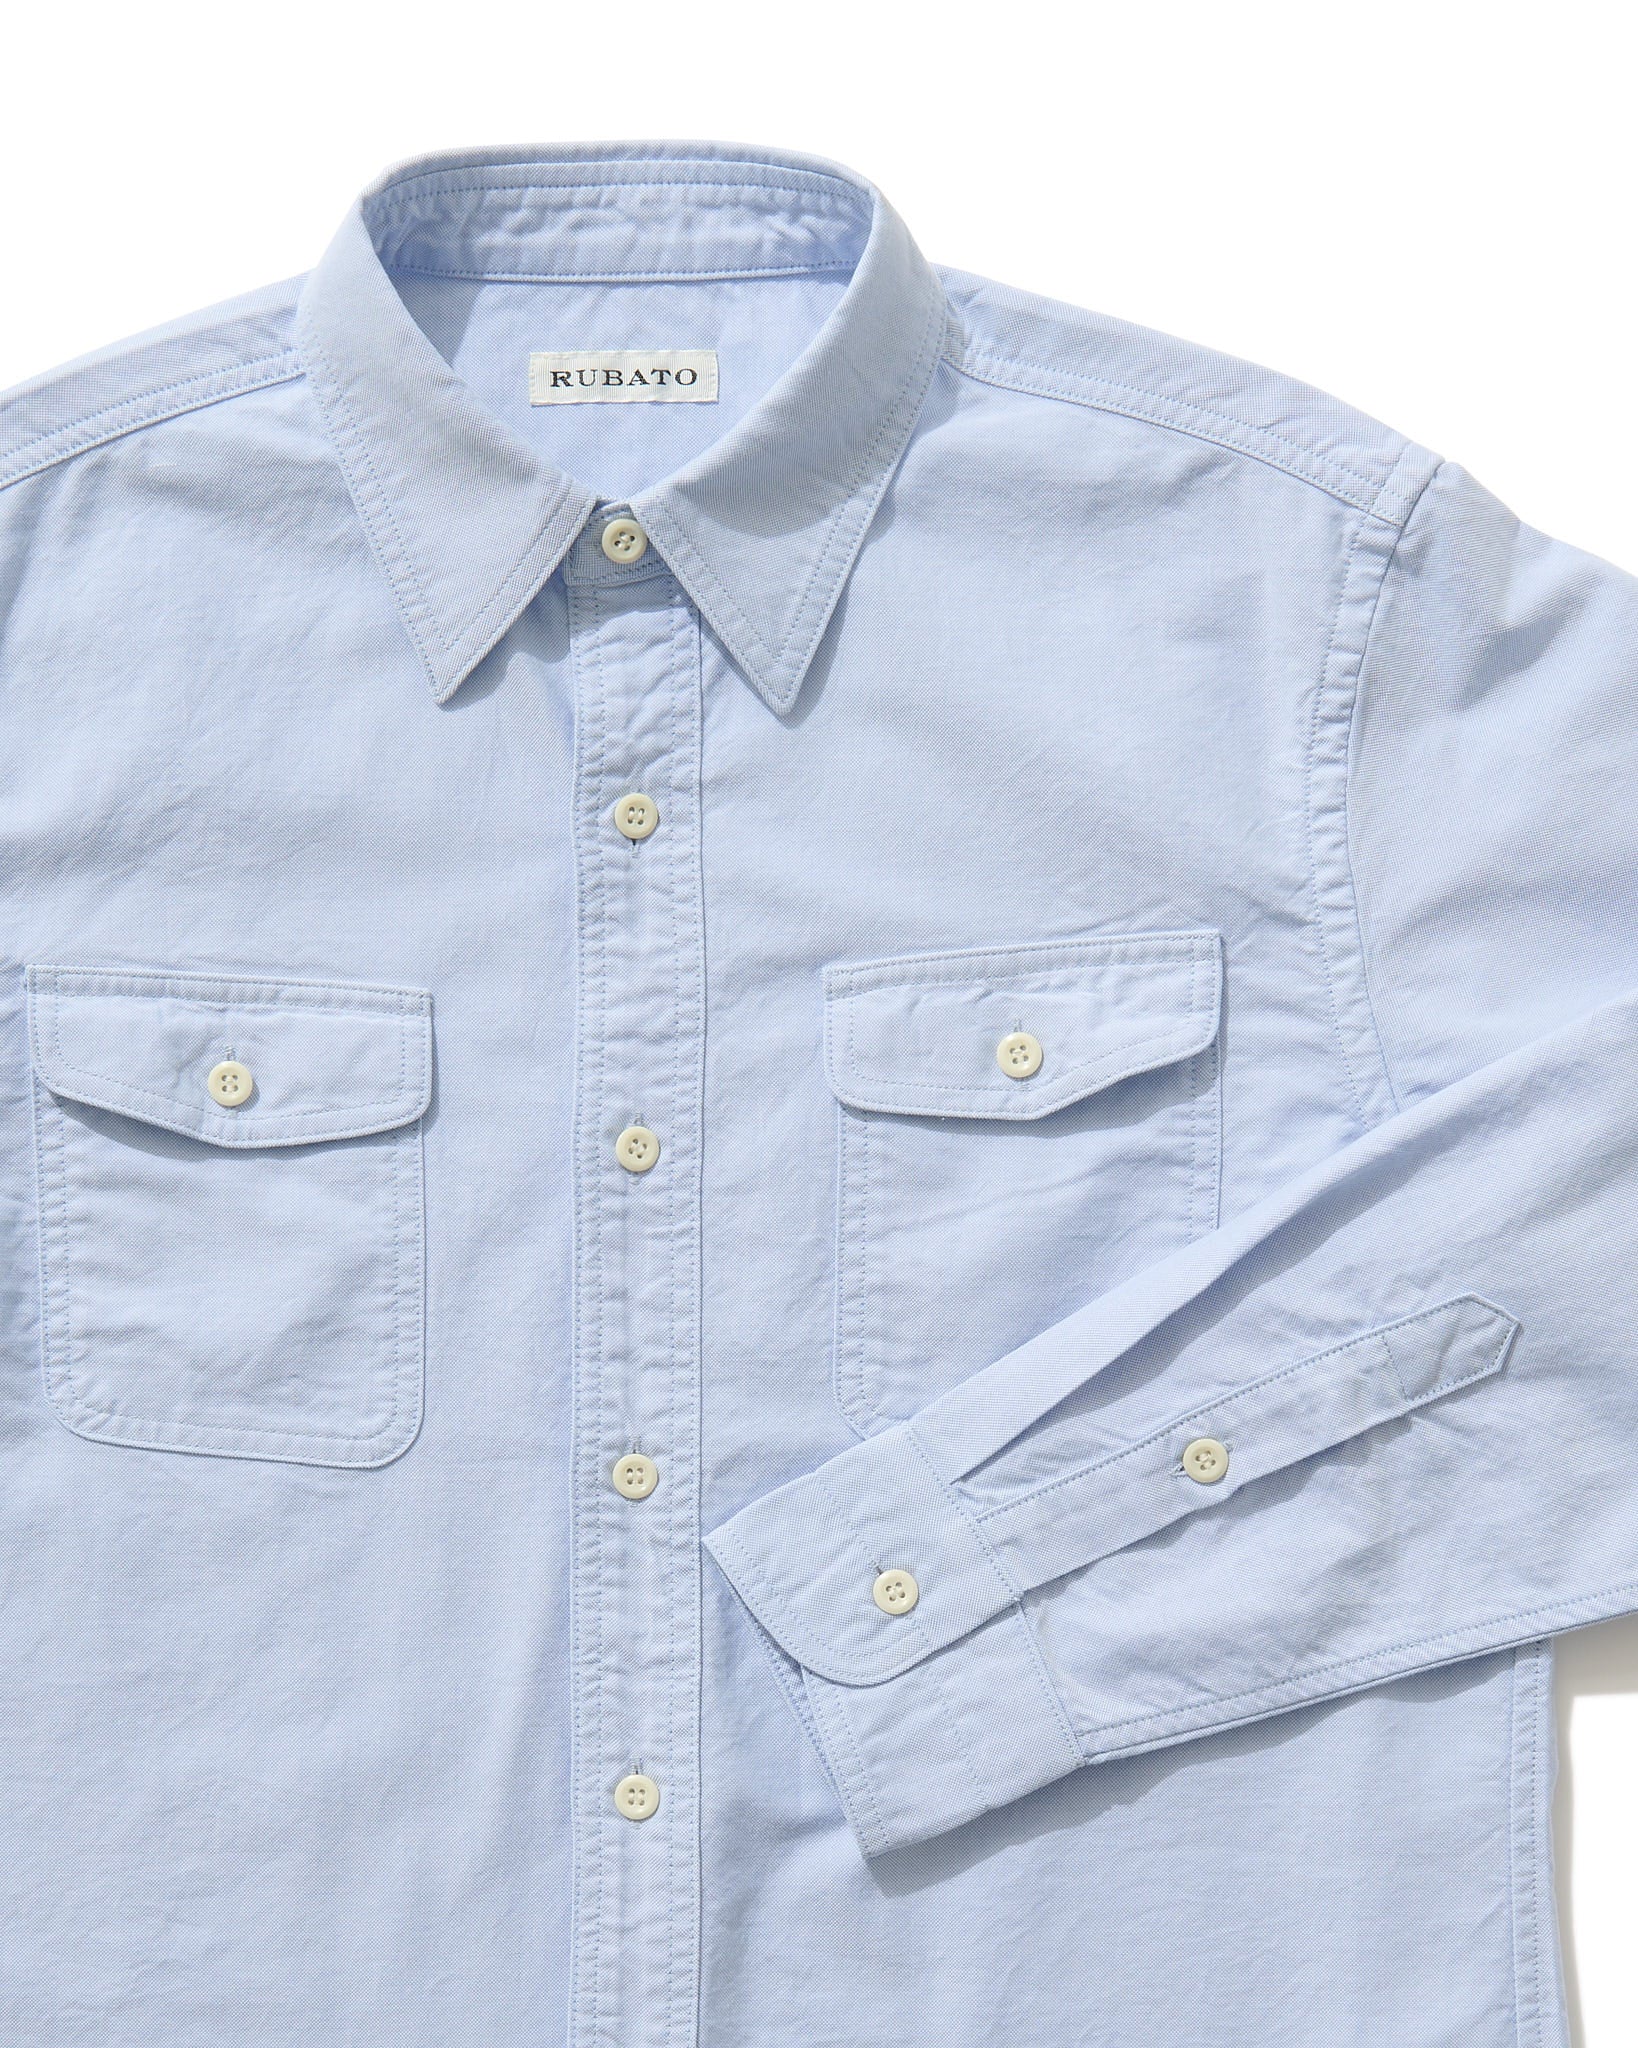 "R" Shirt in New Haven Blue Oxford